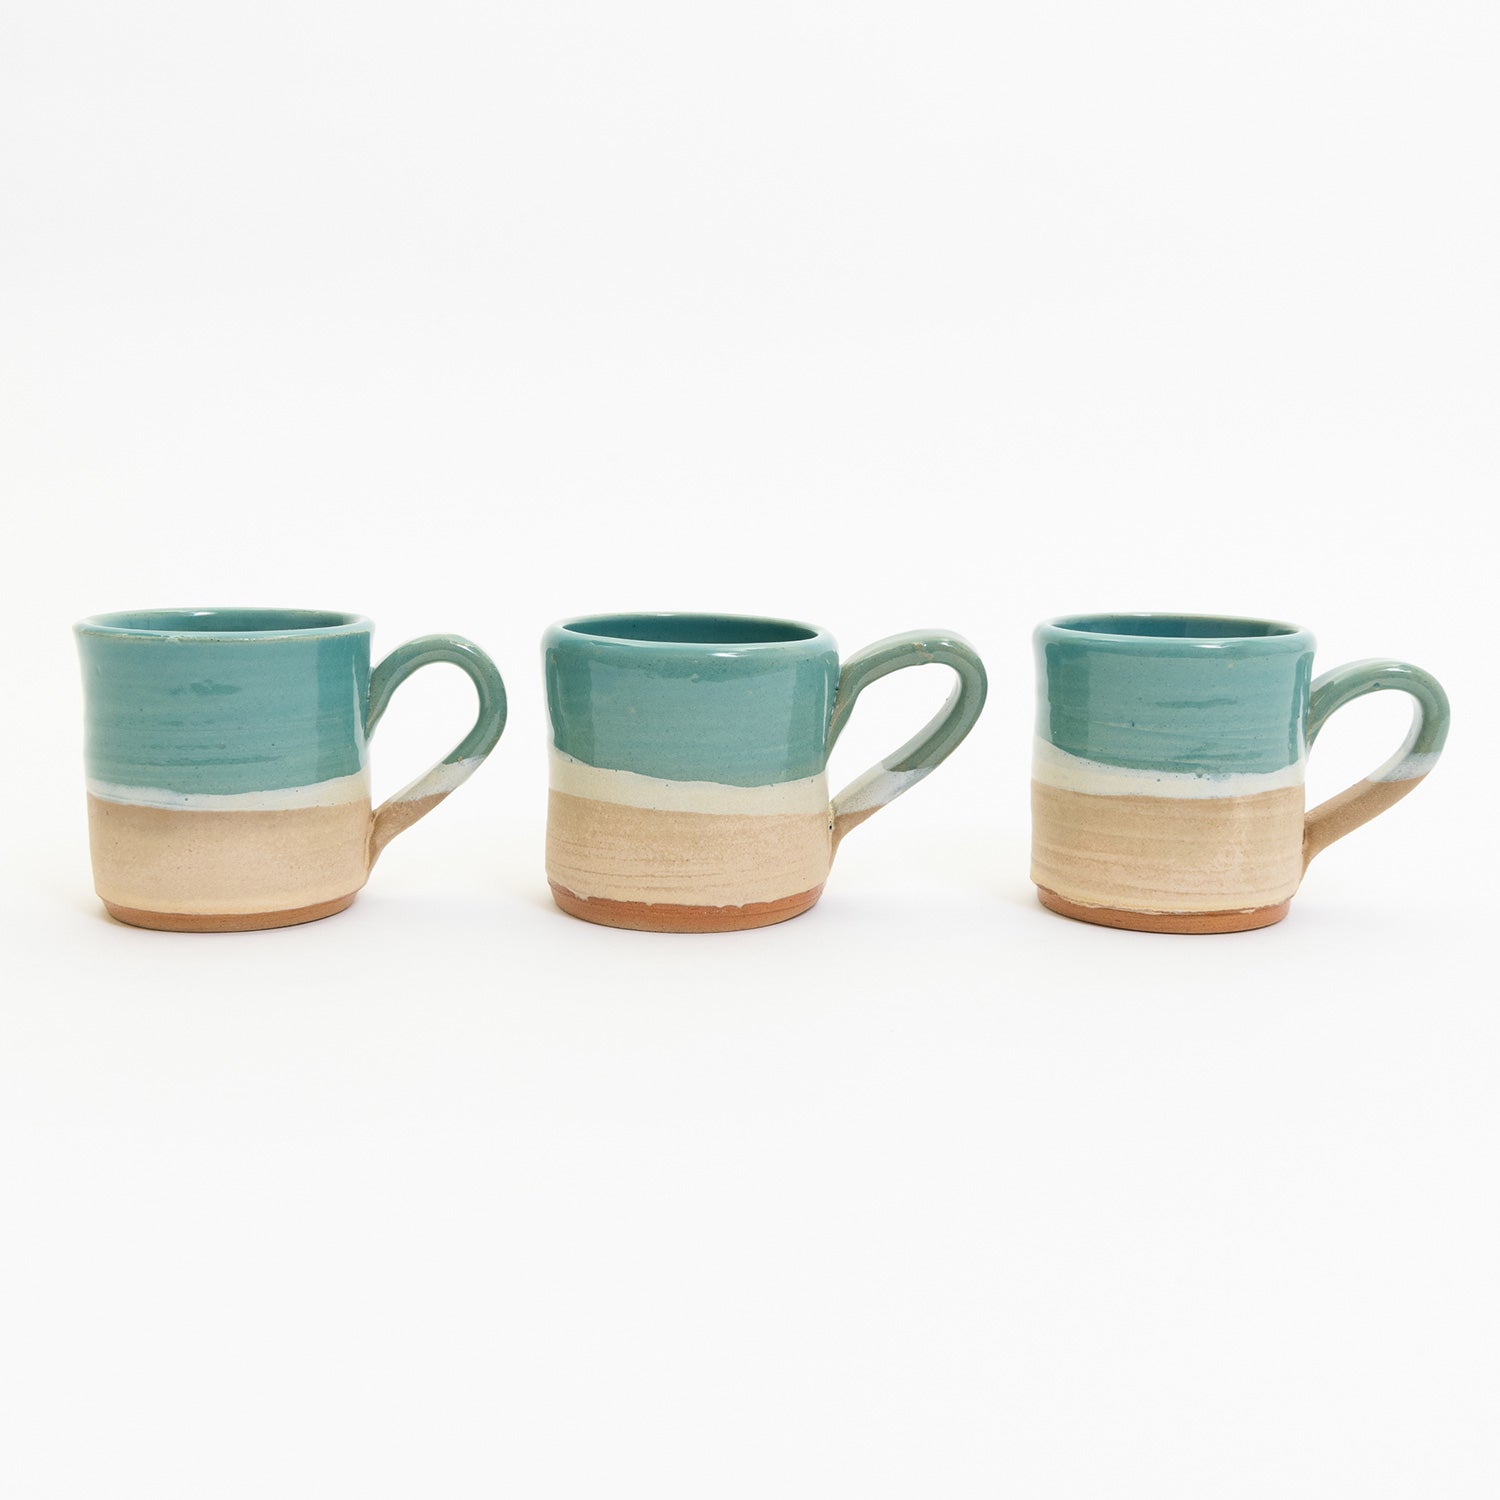 Espresso cups pictured on a white background. The cup has an ocean design, with the sea, a wave, and the sand across it.